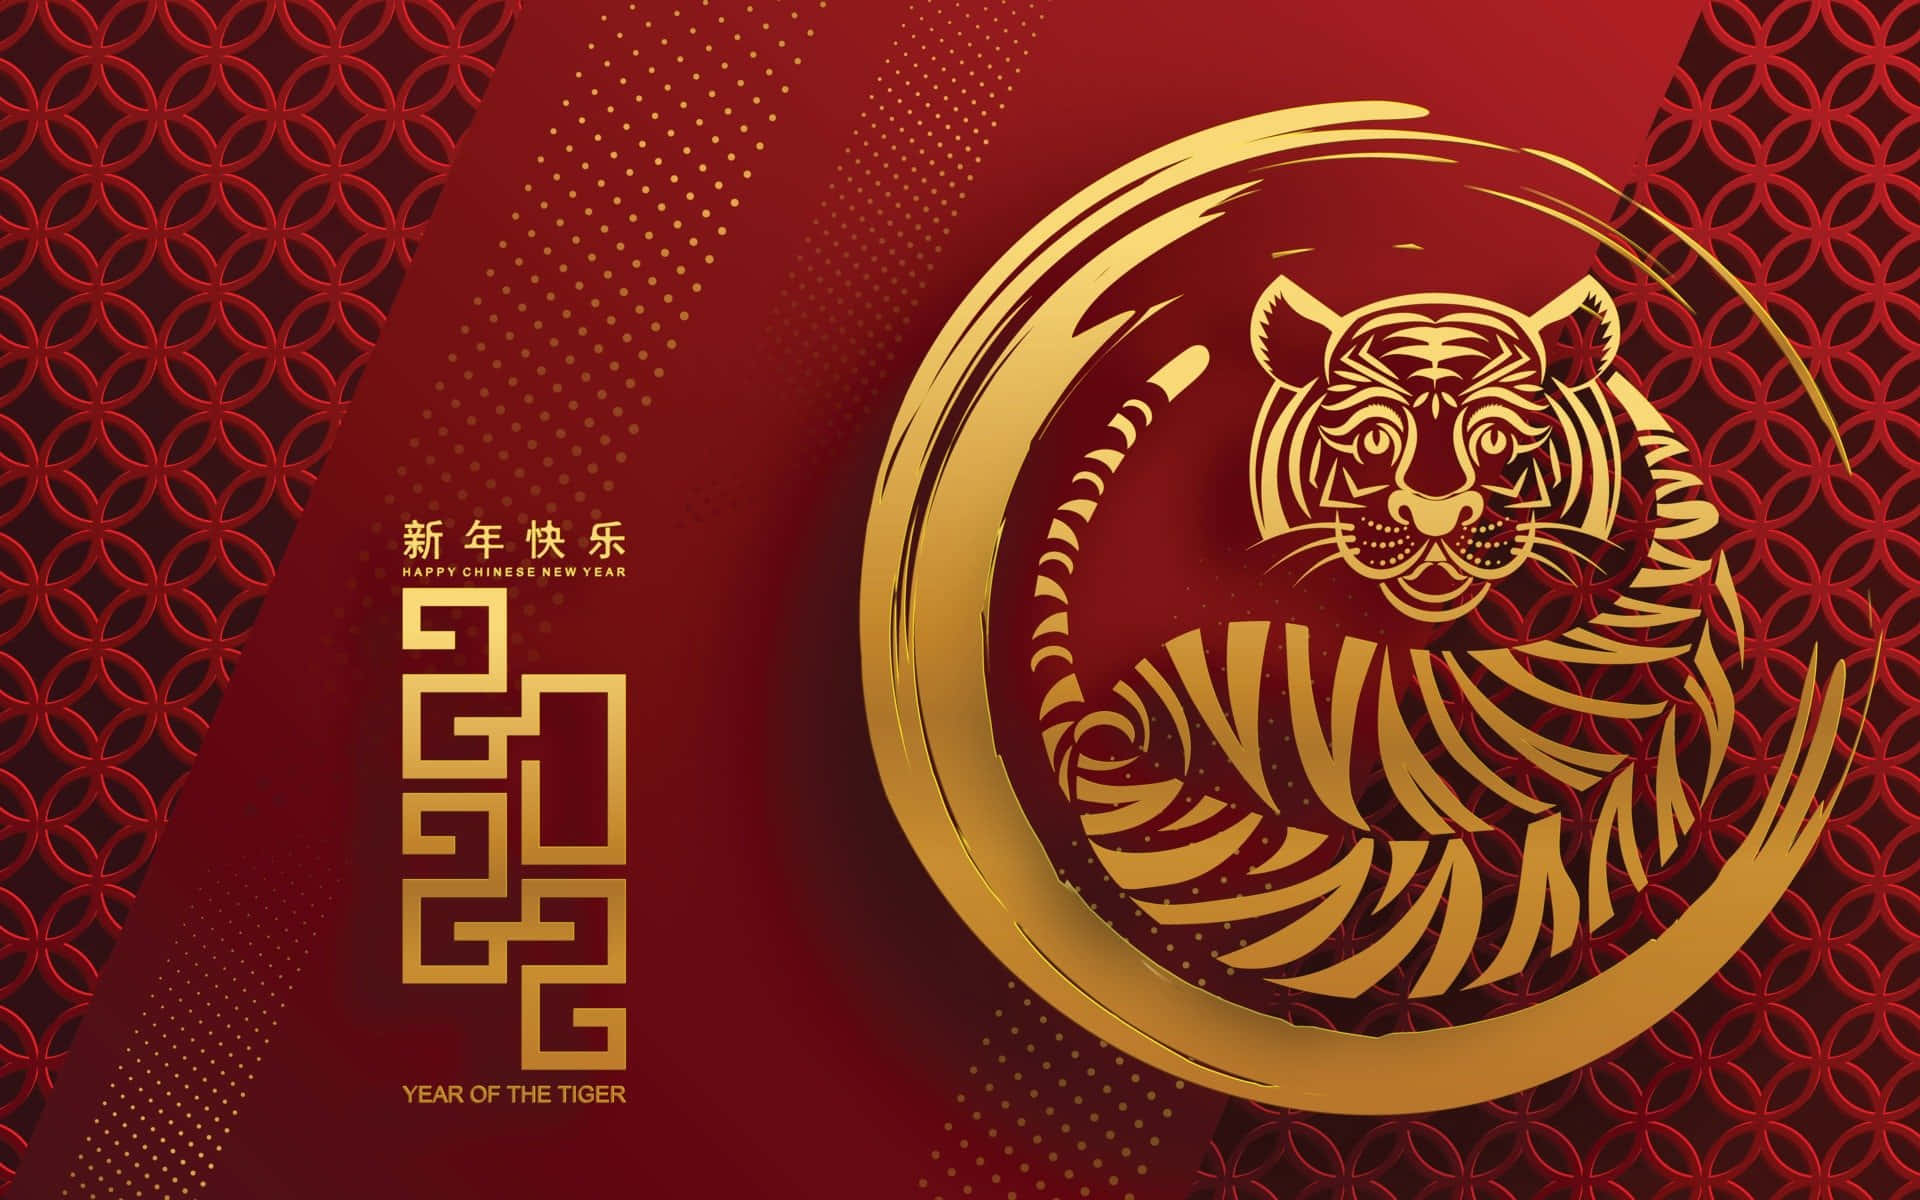 Celebrate Chinese New Year 2022 with a beautiful, festive background!